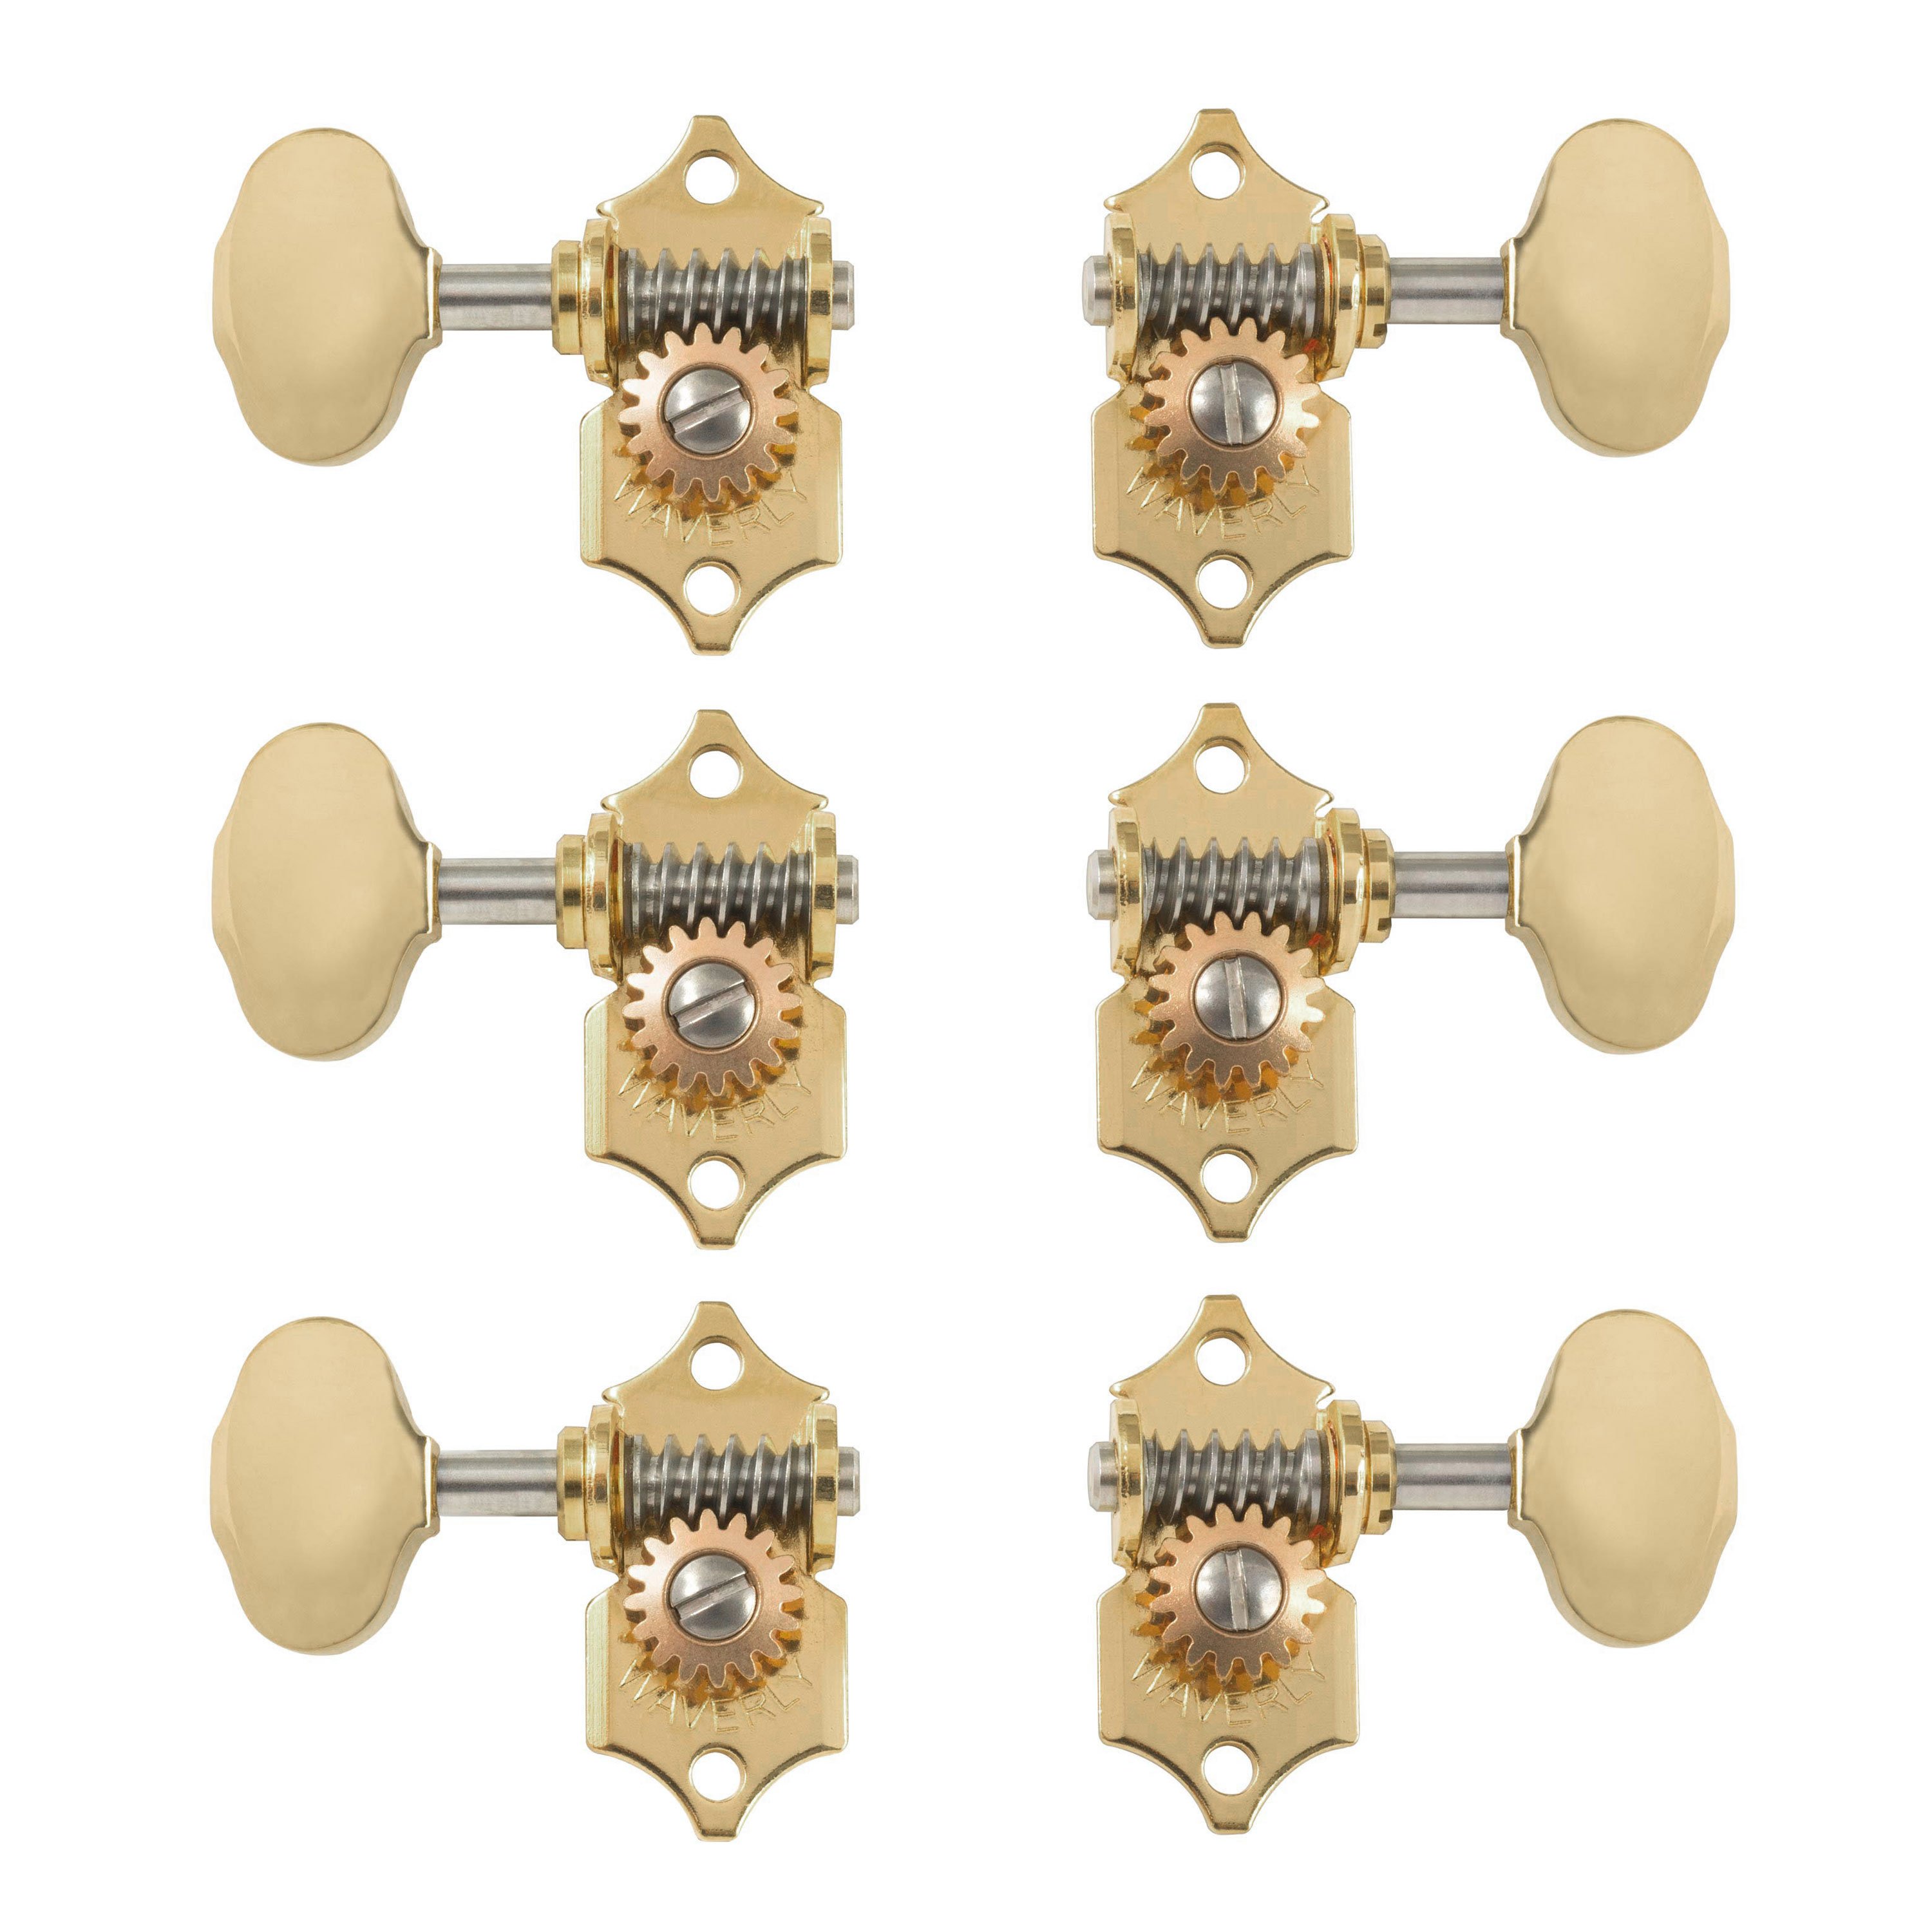 Waverly Guitar Tuners with Butterbean Knobs for Solid Pegheads